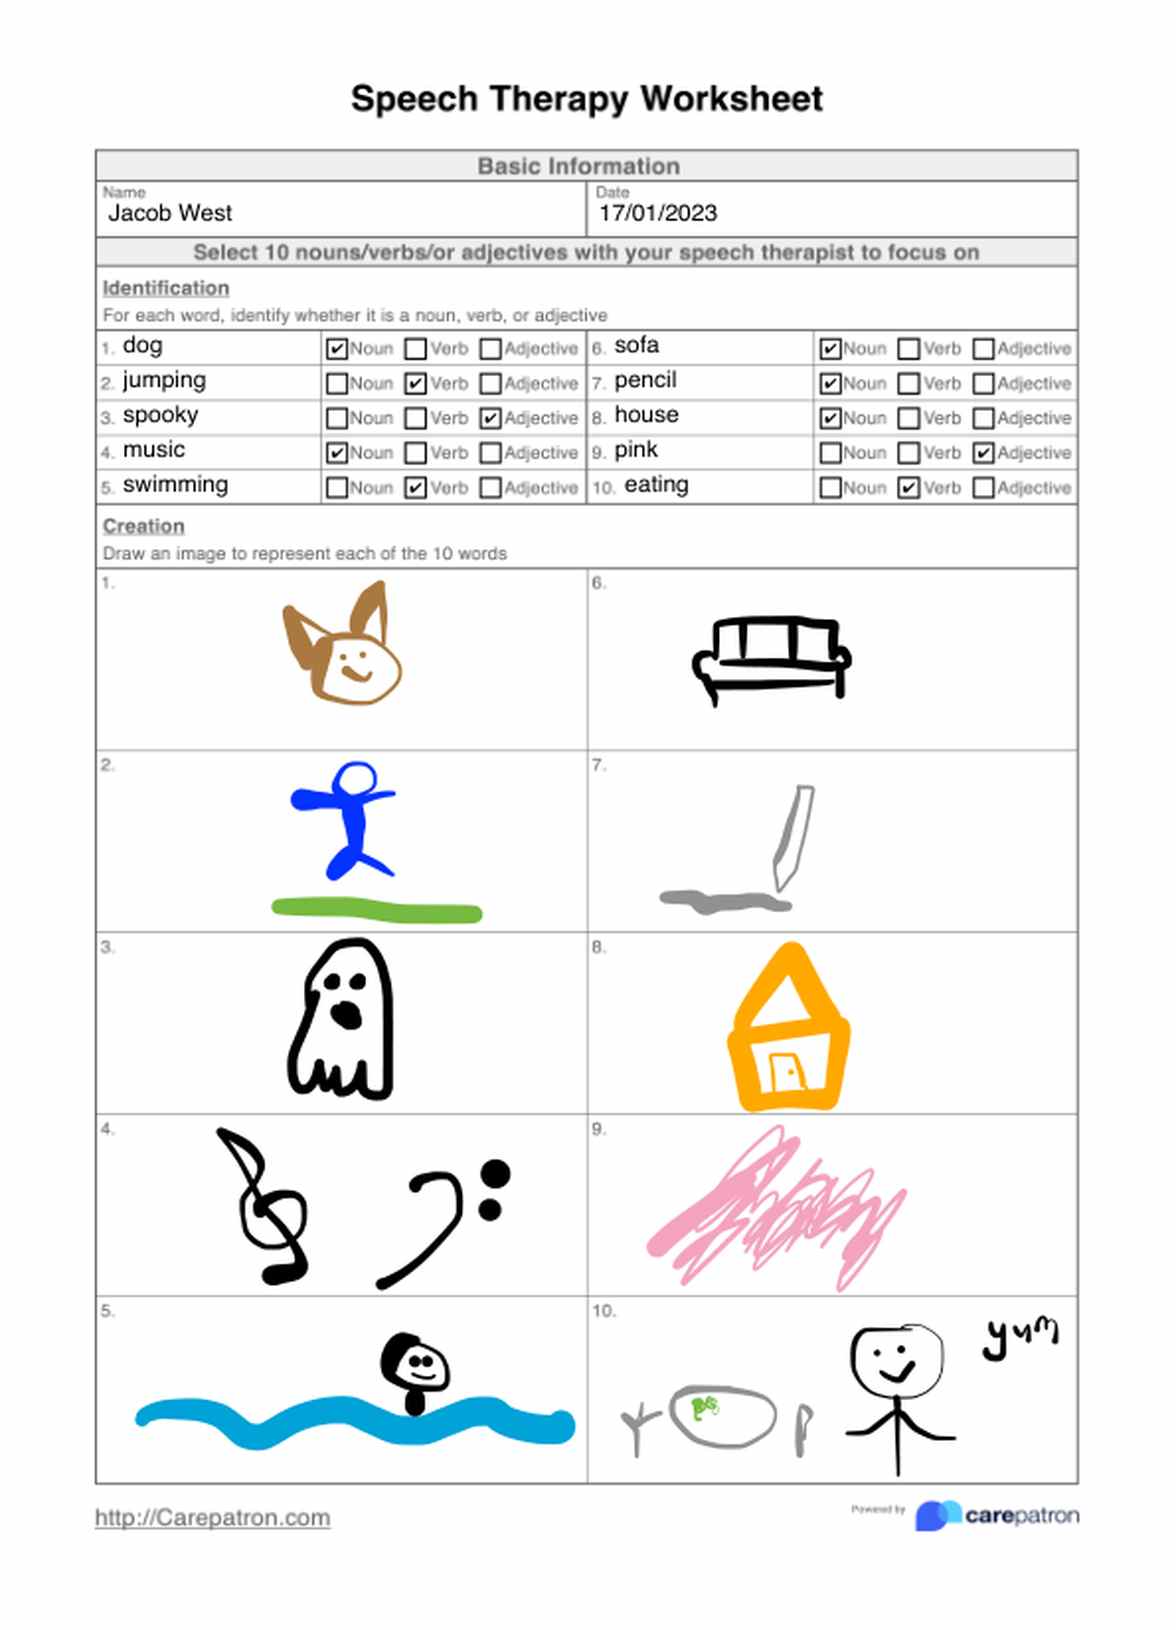 Speech Therapy Worksheet PDF Example